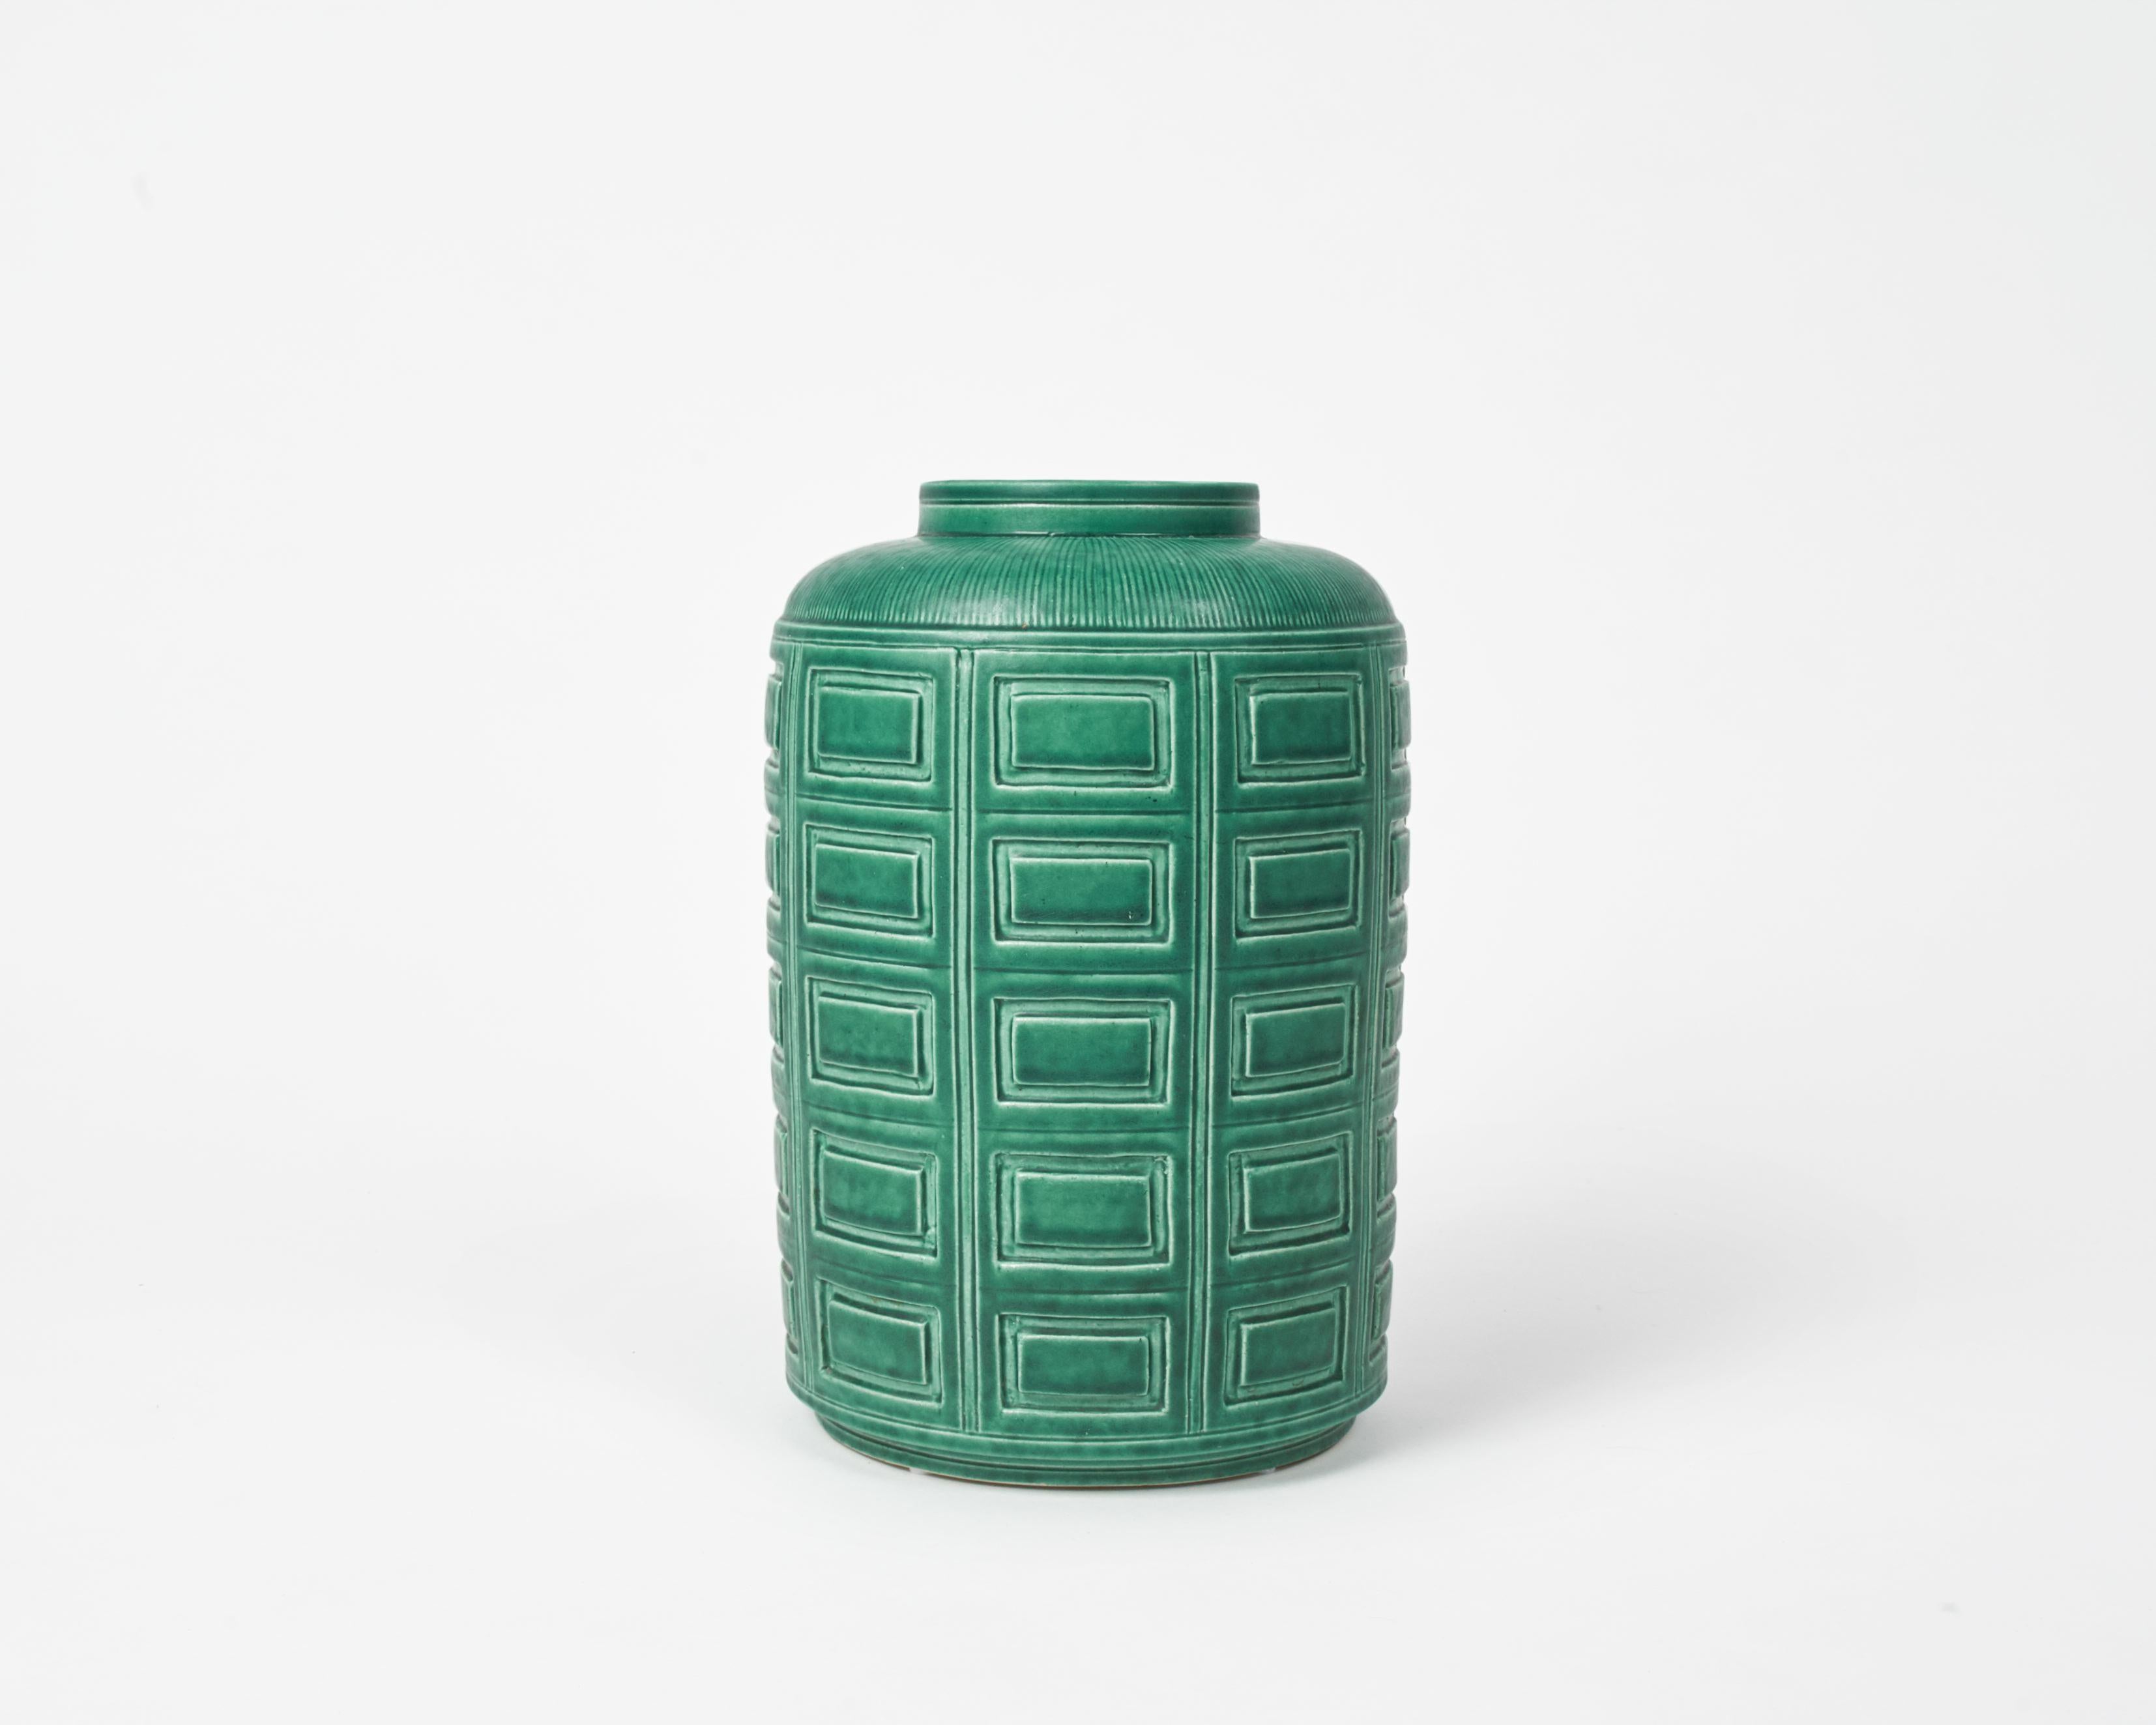 This beautiful piece is part of the artist's Argenta Series, which he produced for the Gustavsberg Factory, and which first won him major success. The series includes everything from ashtrays to 60 kg urns-- primarily in a green glaze with silver